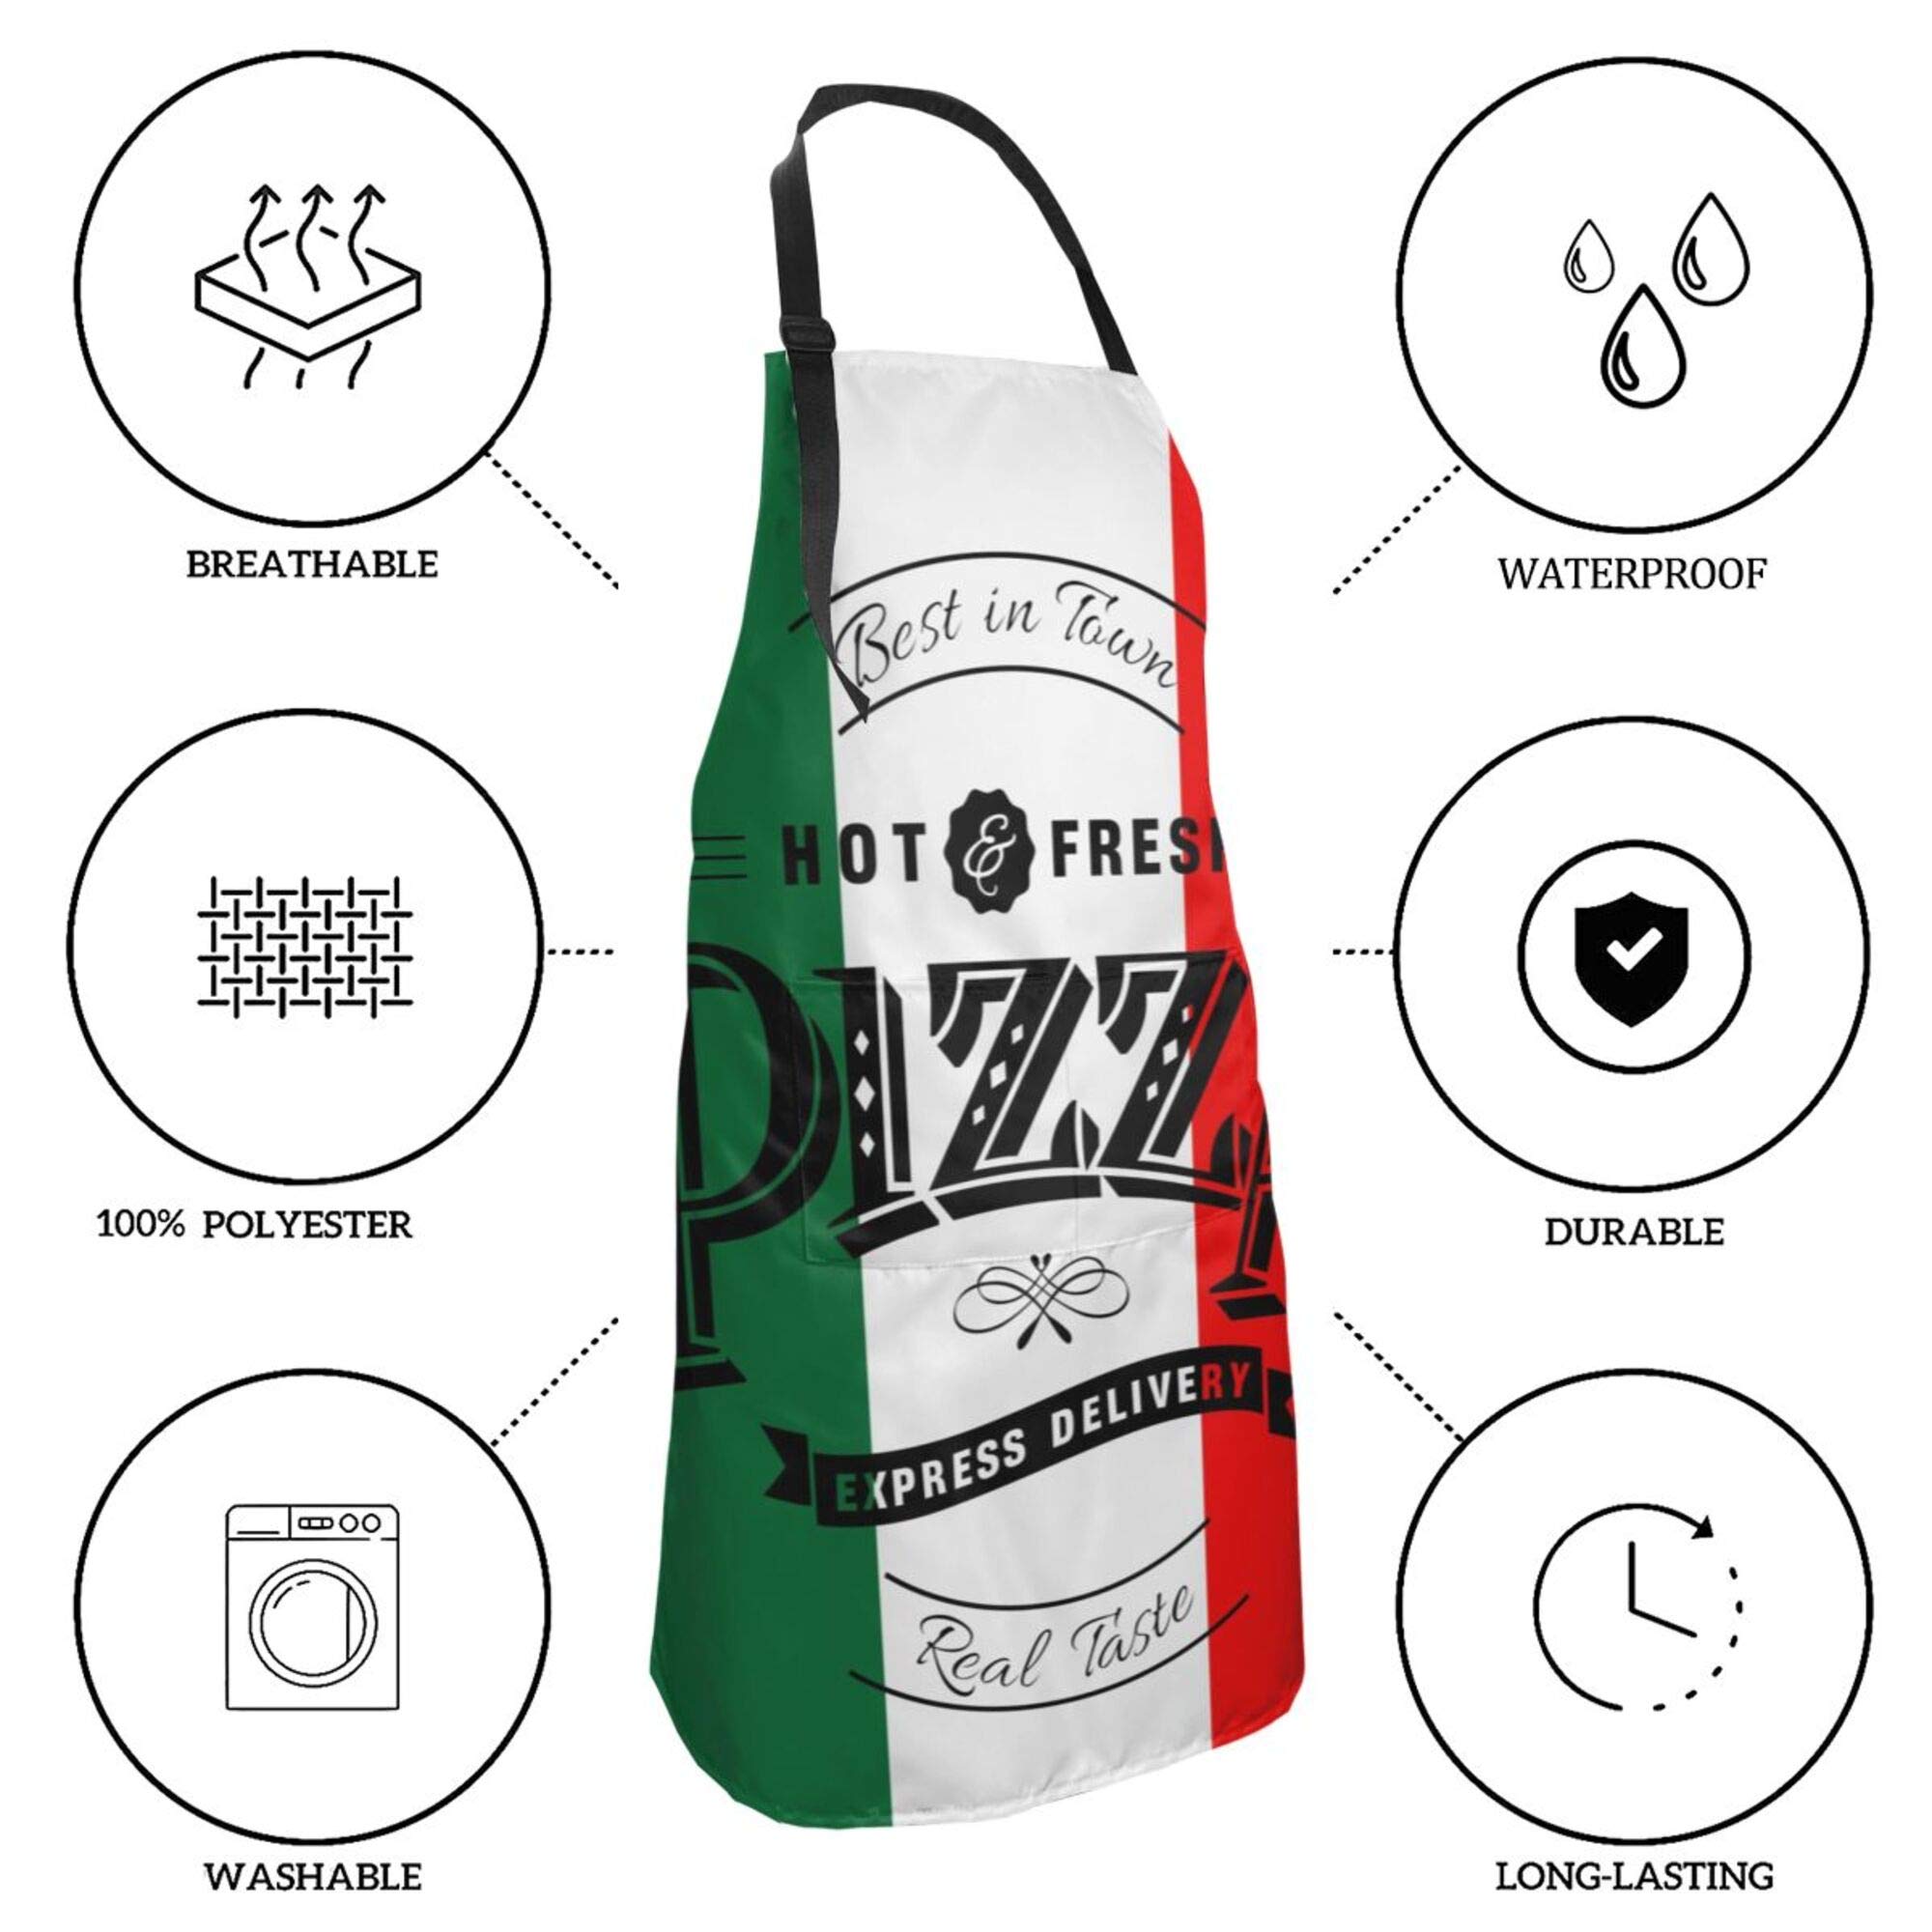 EZYES Pizza Apron, Retro Grunge Italian Flag Kitchen Aprons with Pocket & Adjustable Neck for Chef Cooking Gardening Home Adult Size